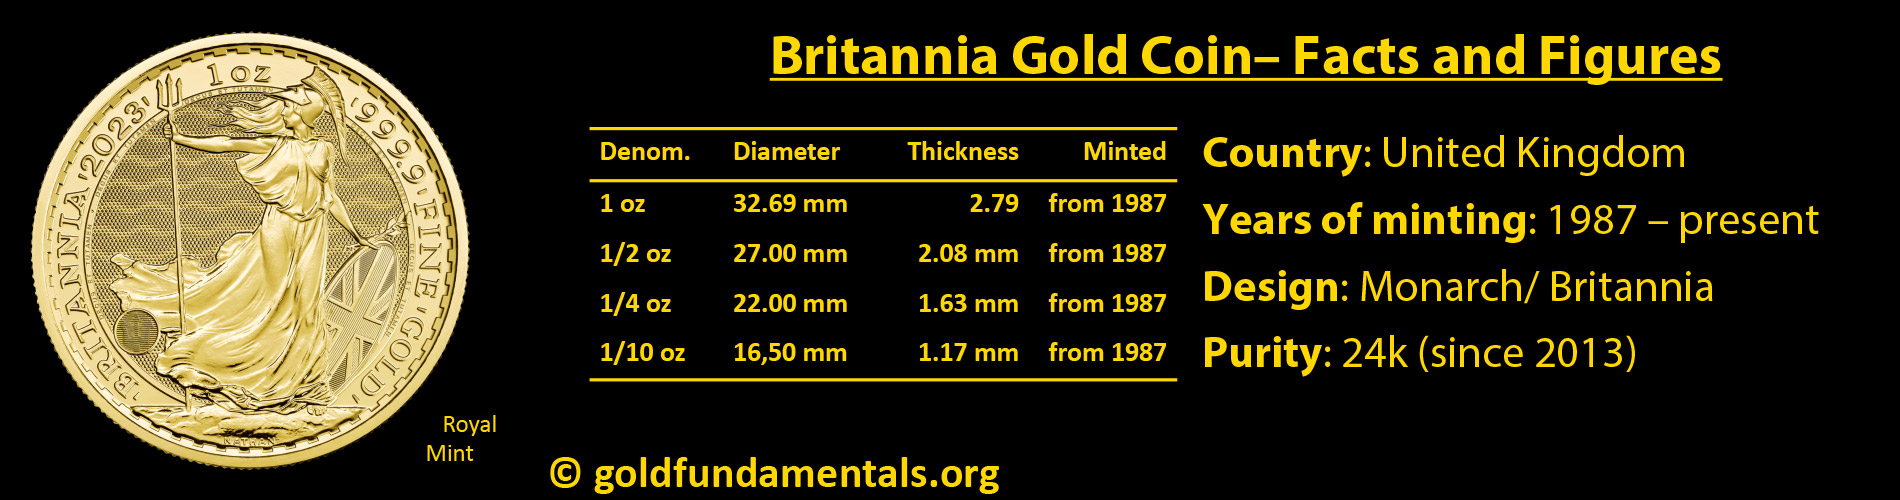 Britannia Gold Coin: Facts and Figures.